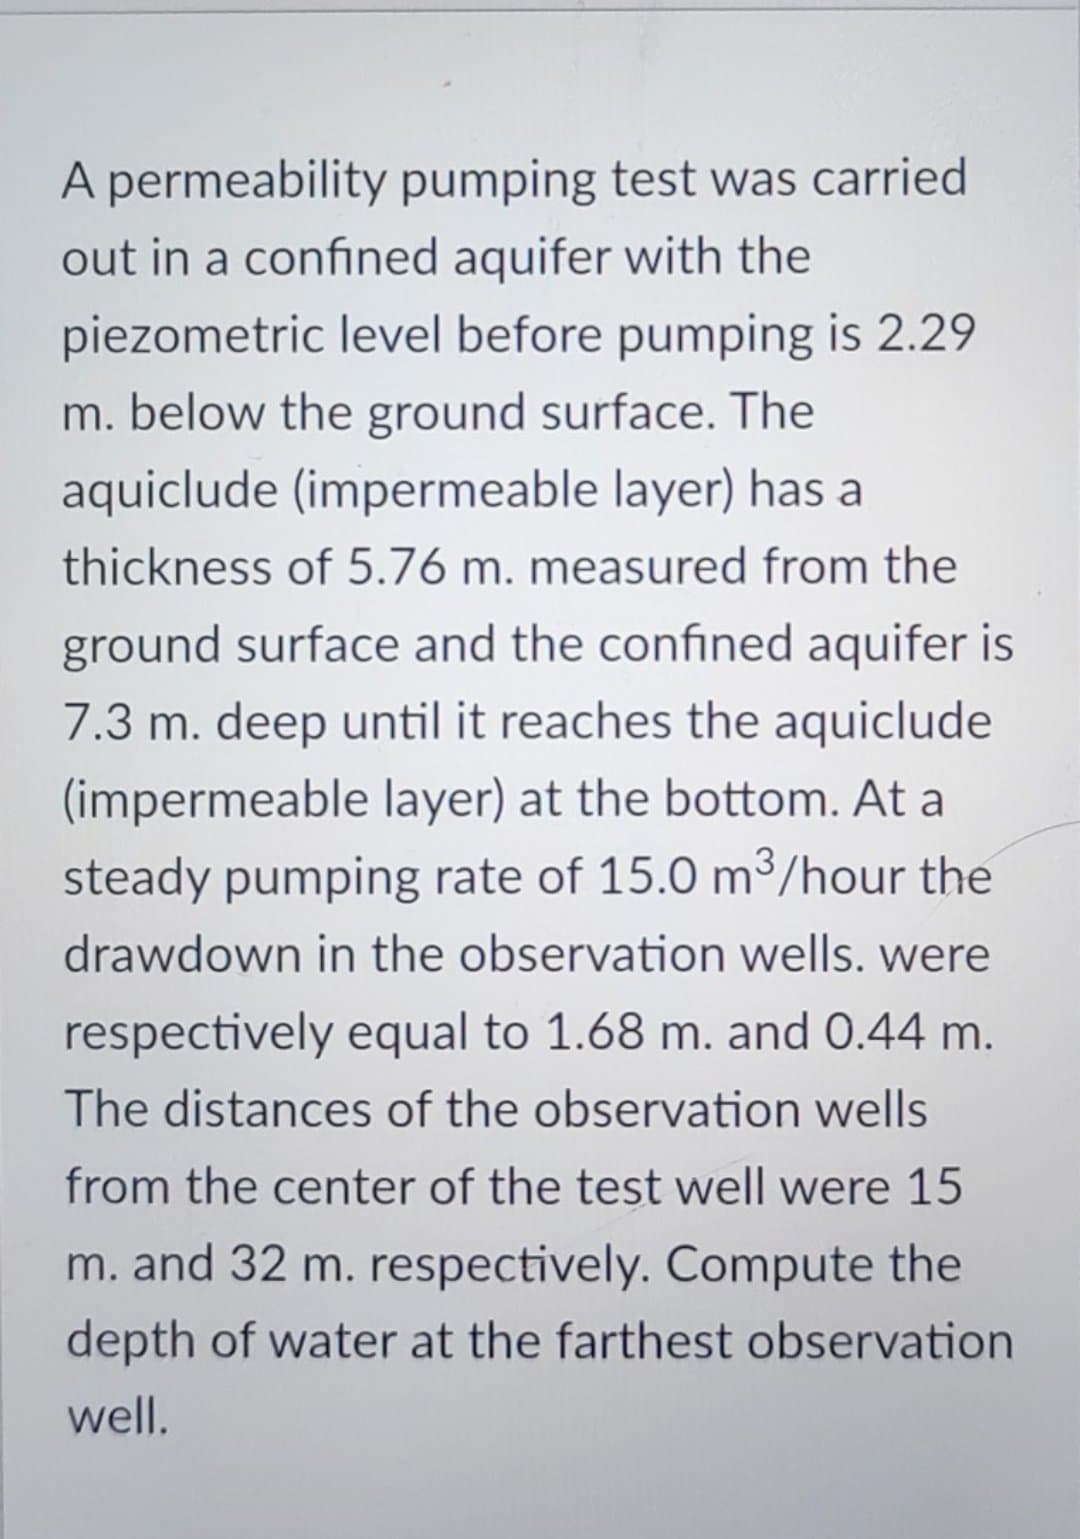 A permeability pumping test was carried
out in a confined aquifer with the
piezometric level before pumping is 2.29
m. below the ground surface. The
aquiclude (impermeable layer) has a
thickness of 5.76 m. measured from the
ground surface and the confined aquifer is
7.3 m. deep until it reaches the aquiclude
(impermeable layer) at the bottom. At a
steady pumping rate of 15.0 m³/hour the
drawdown in the observation wells. were
respectively equal to 1.68 m. and 0.44 m.
The distances of the observation wells
from the center of the test well were 15
m. and 32 m. respectively. Compute the
depth of water at the farthest observation
well.